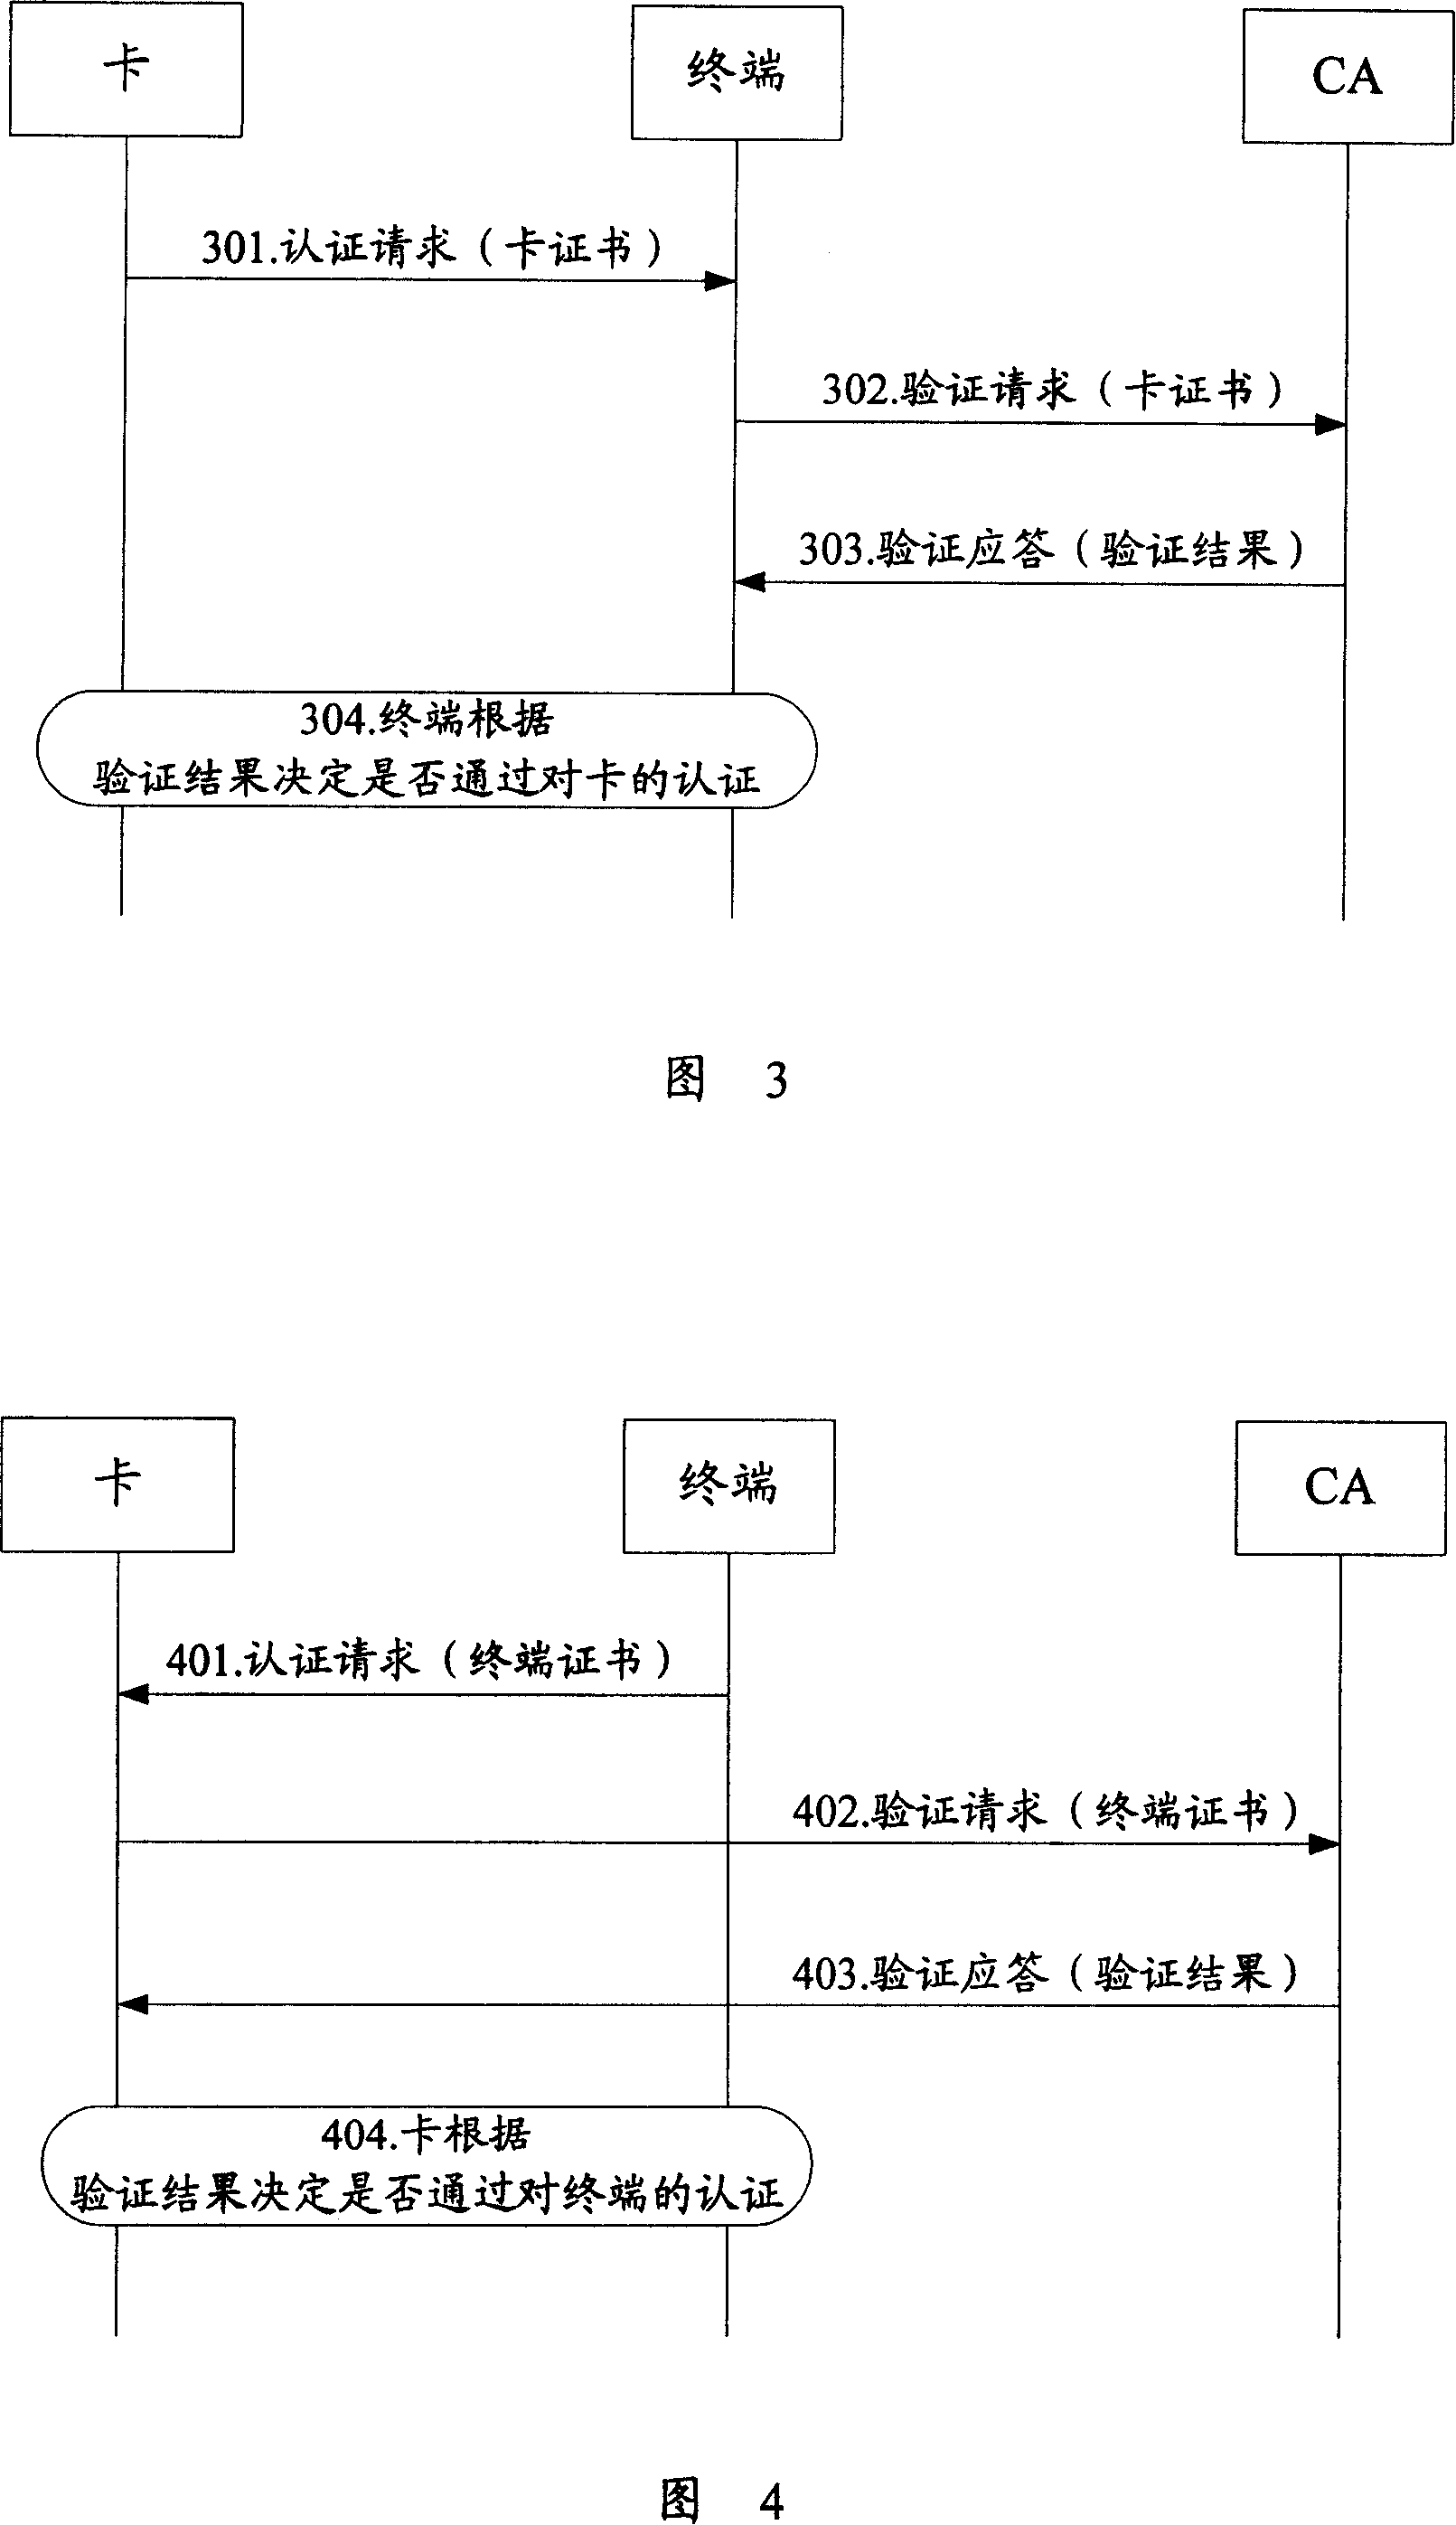 Identification authentication method and system